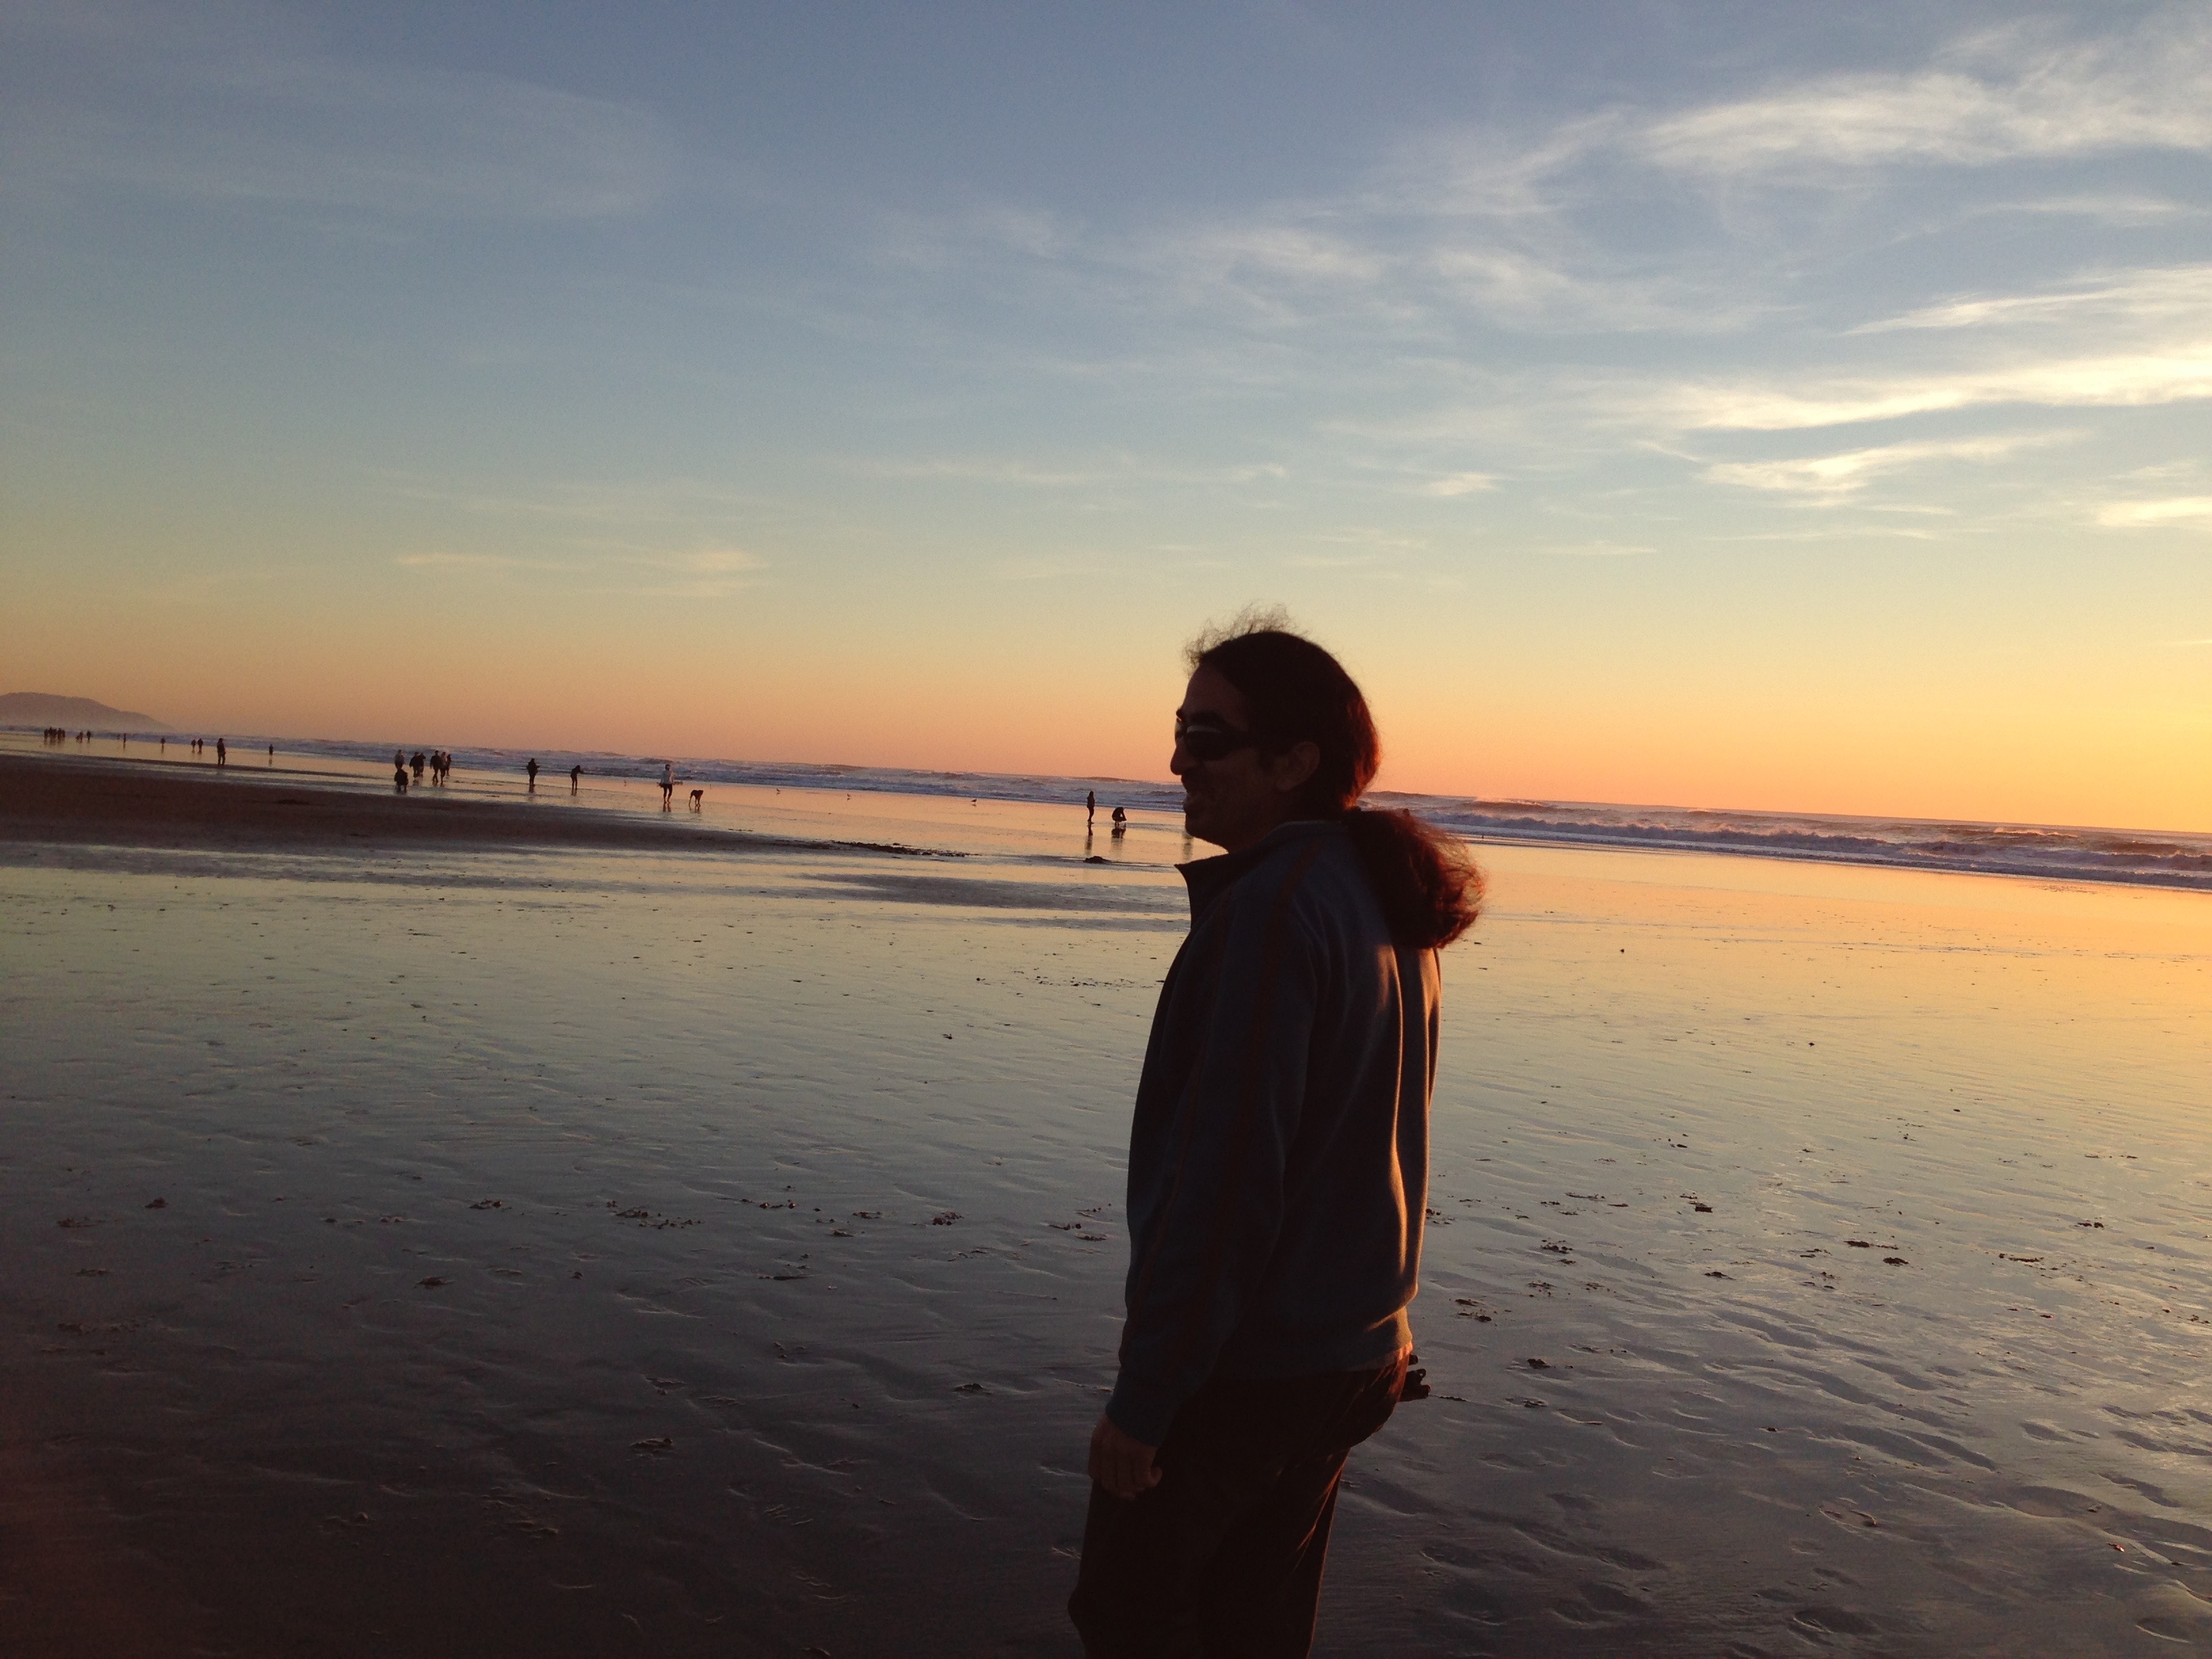 Ahmet is standing on the beach with sunset in the background